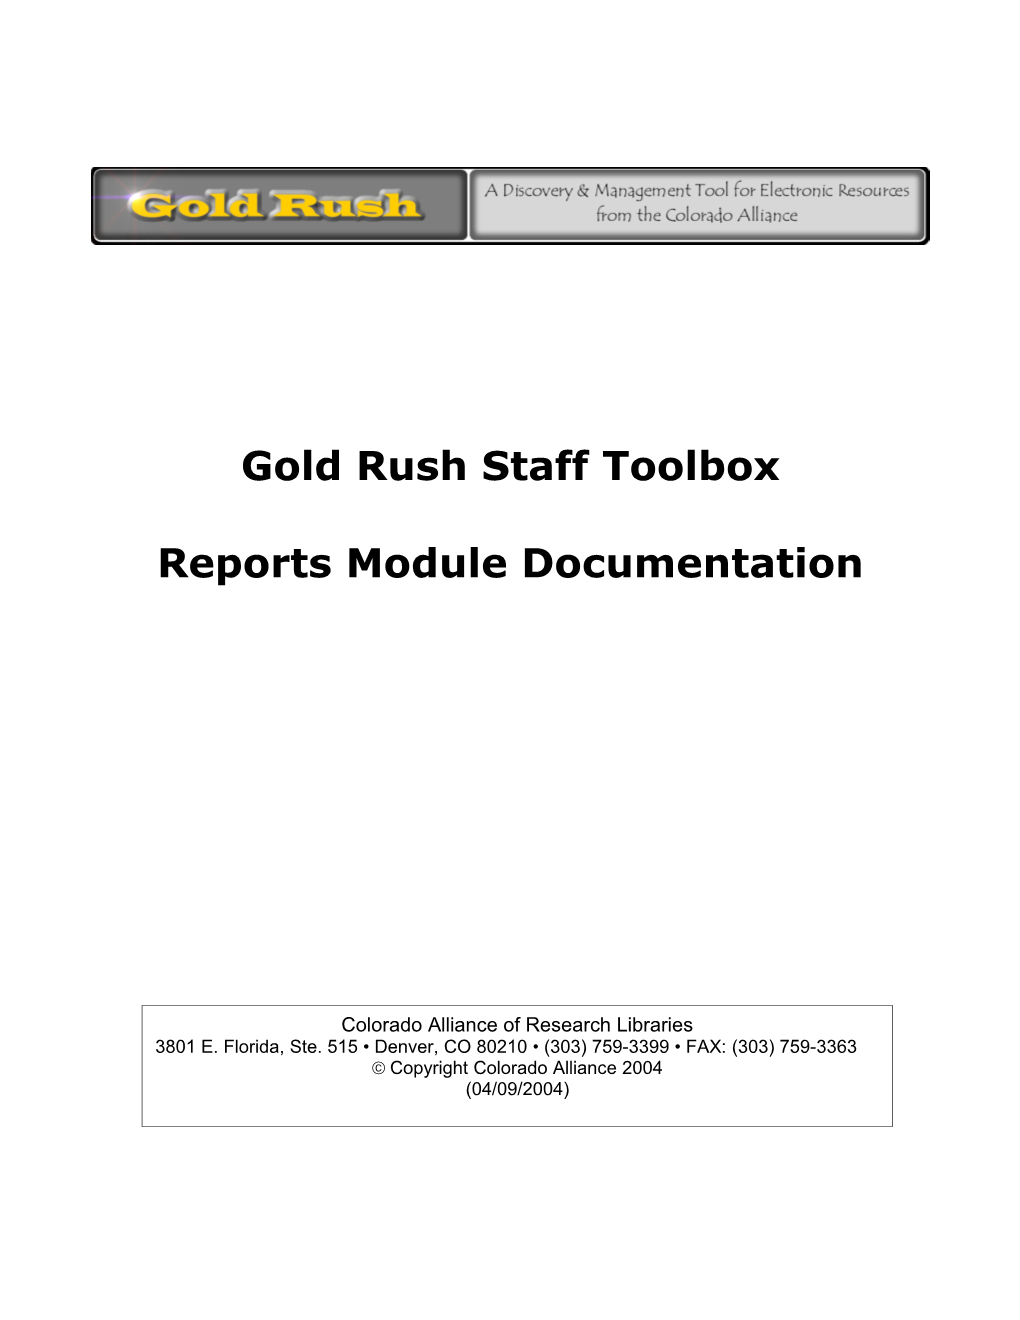 There Are a Wide Variety of Reports Available in the Gold Rush Staff Toolbox, Covering